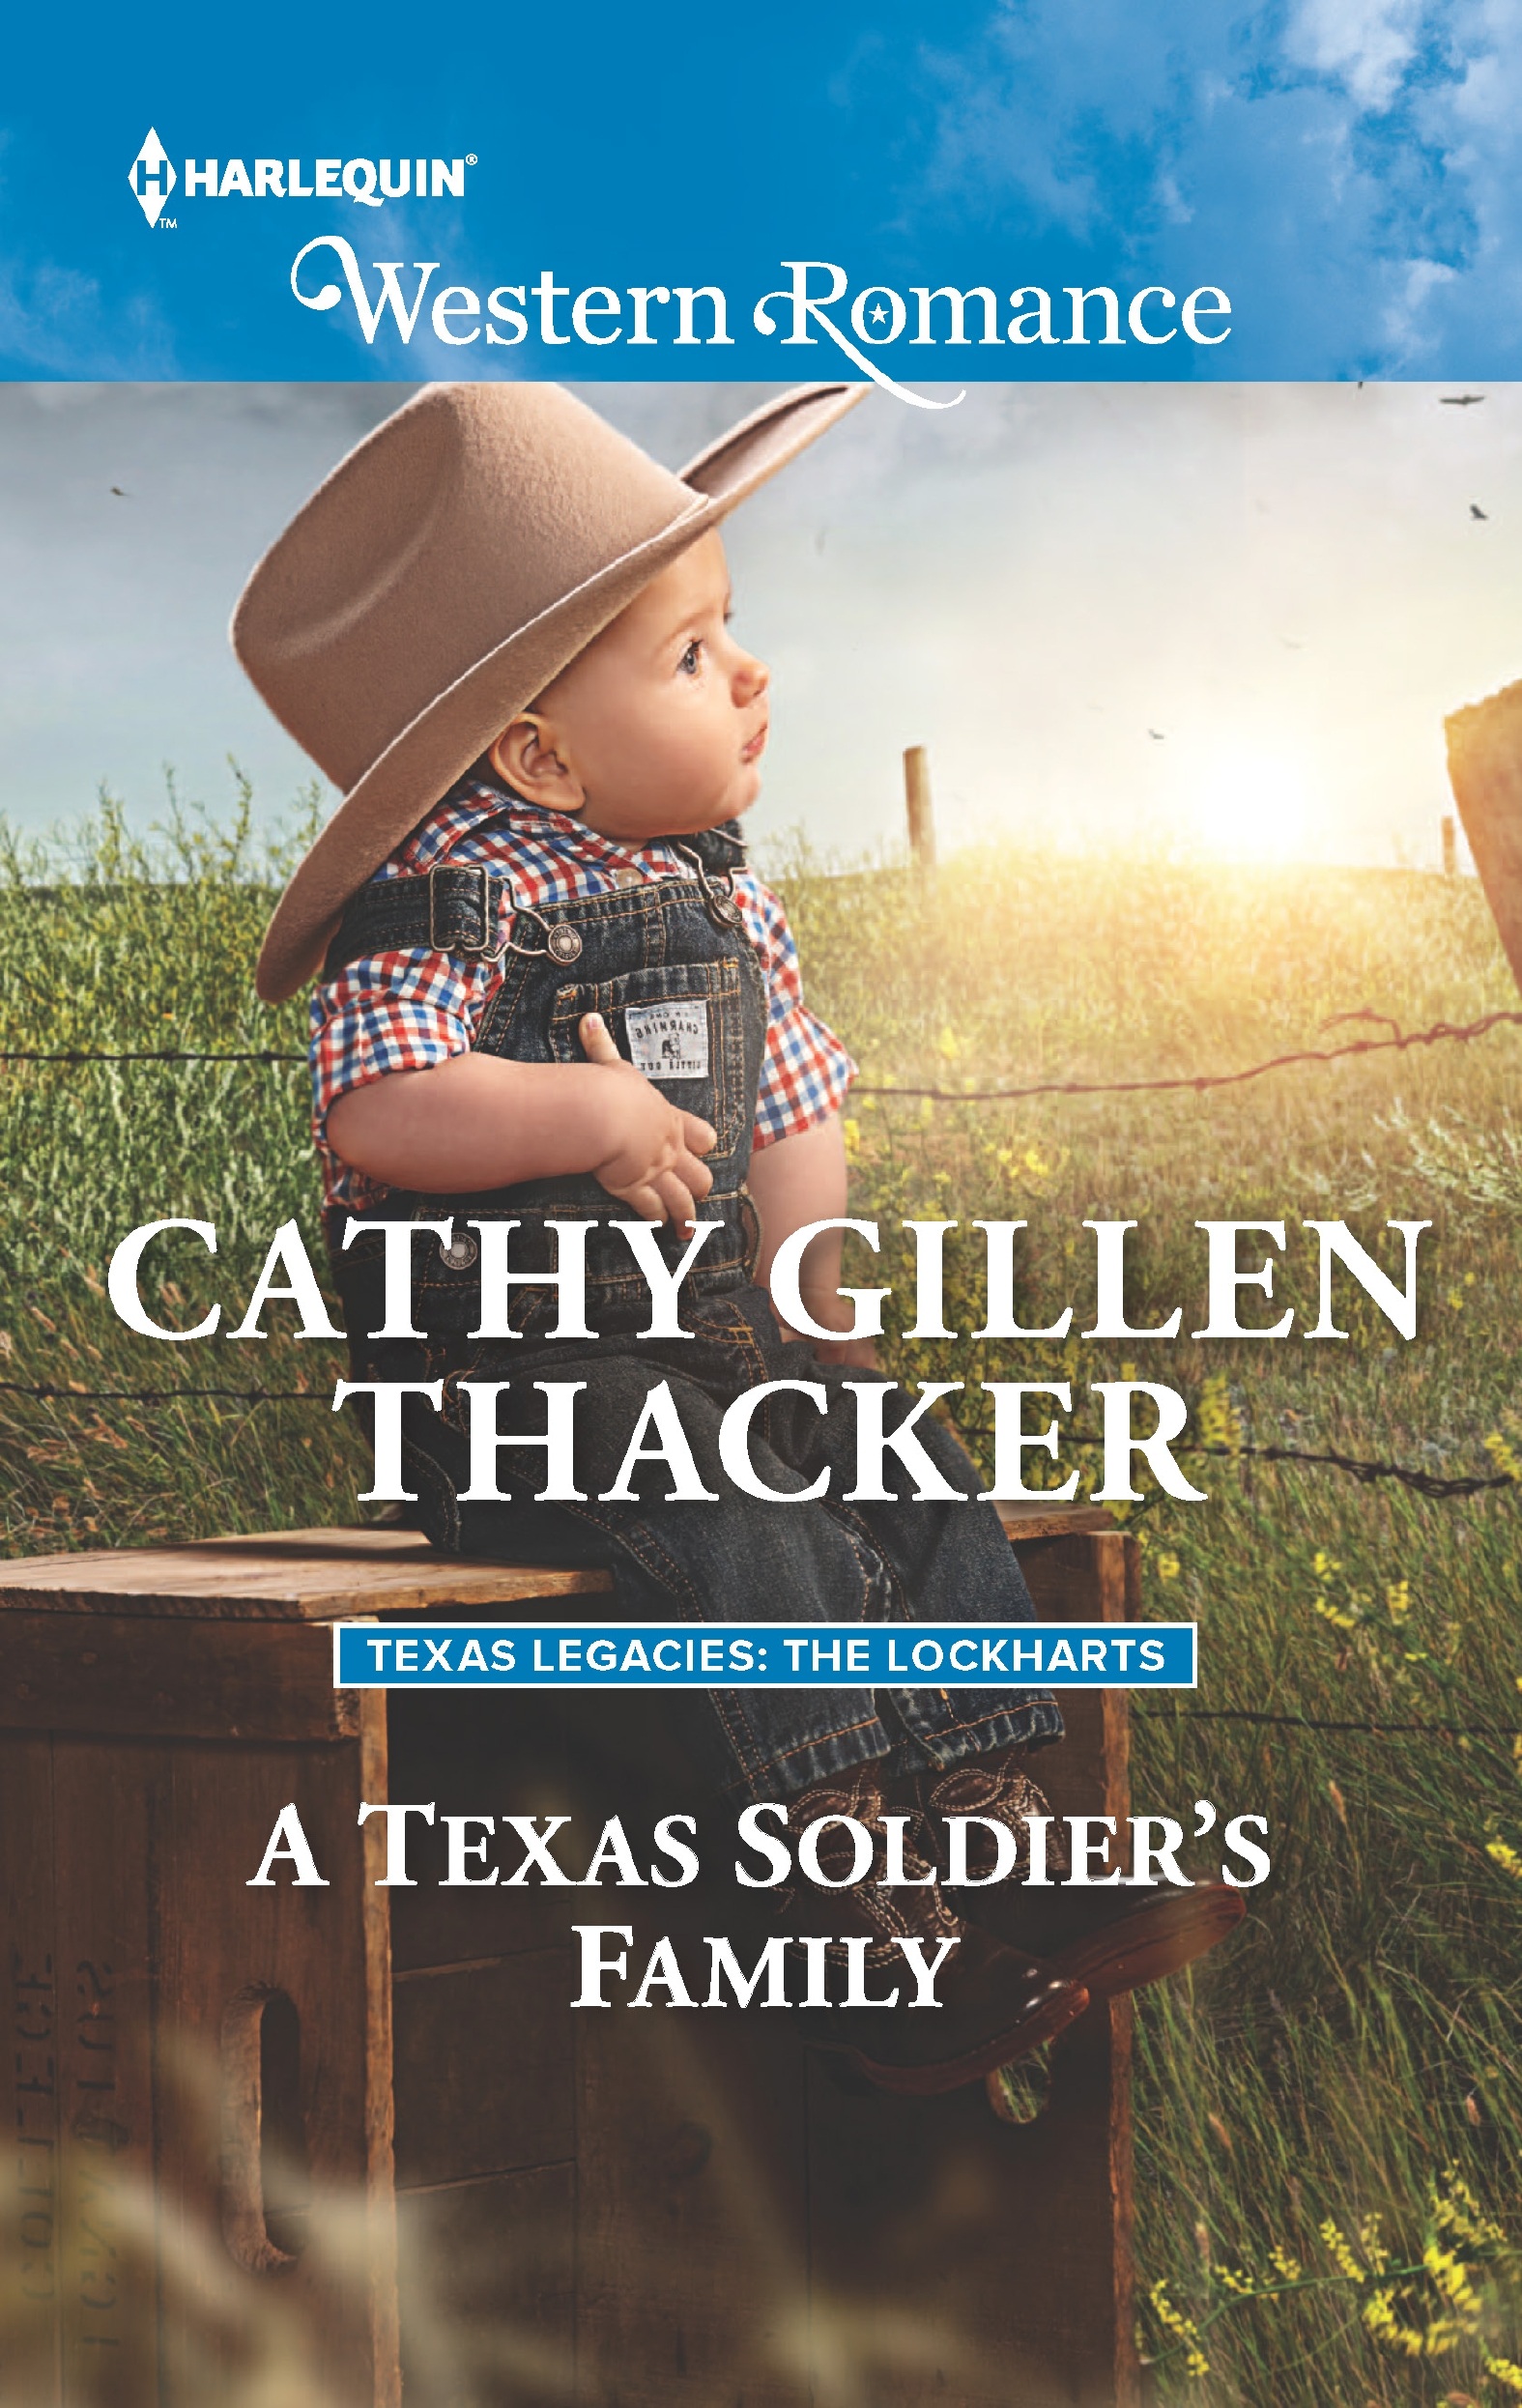 A Texas Soldier's Family (2016)